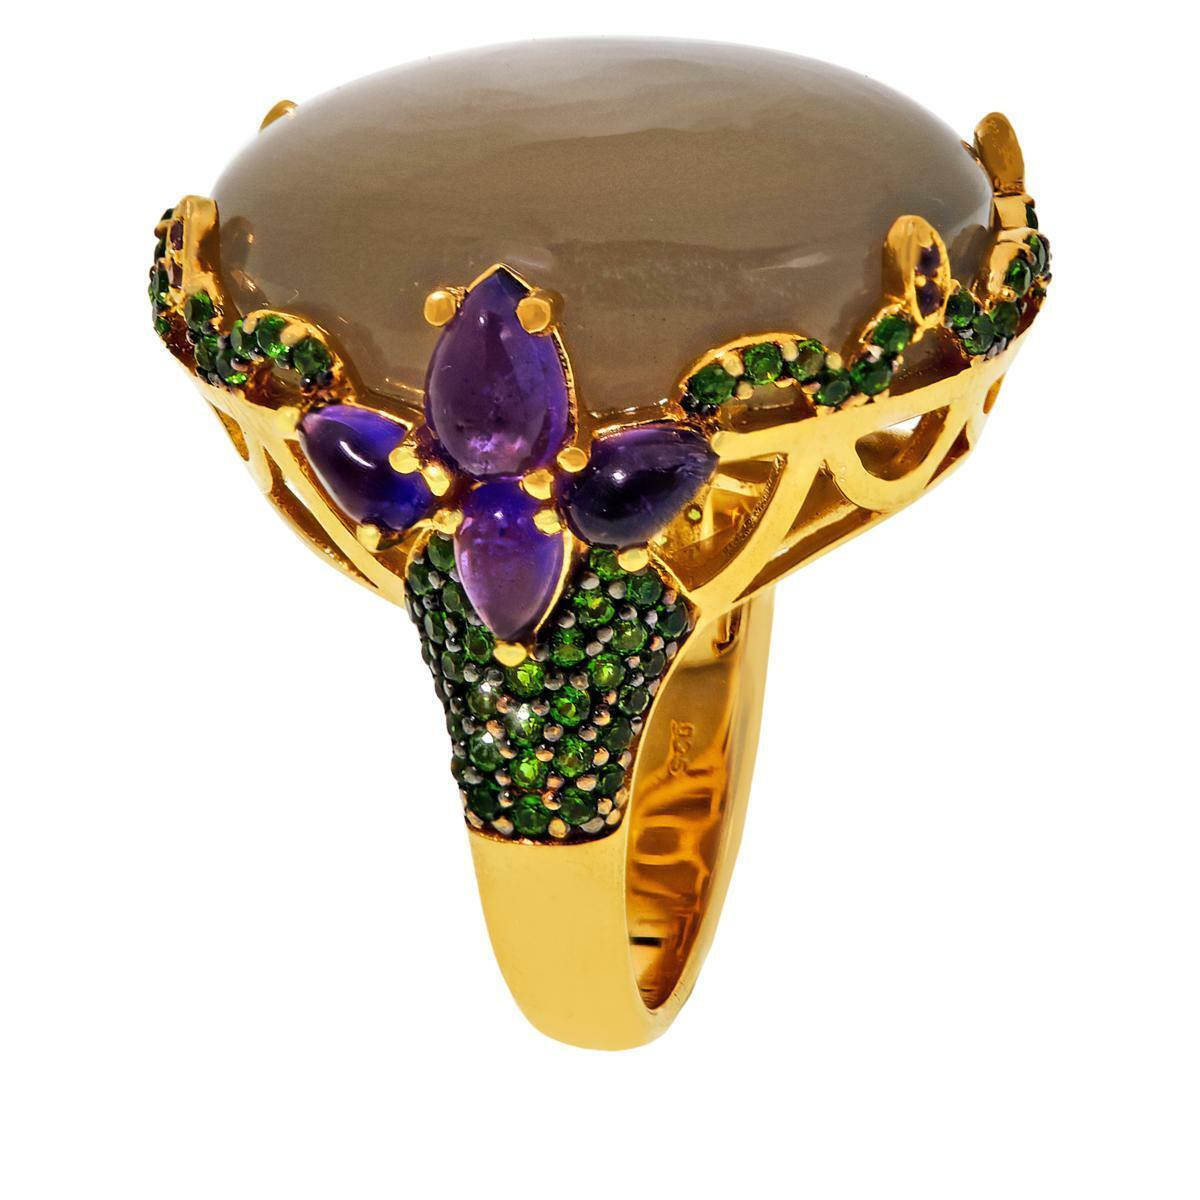 Colleen Lopez Gold-Plated Moonstone, Chrome Diopside and Amethyst Ring, Size 7